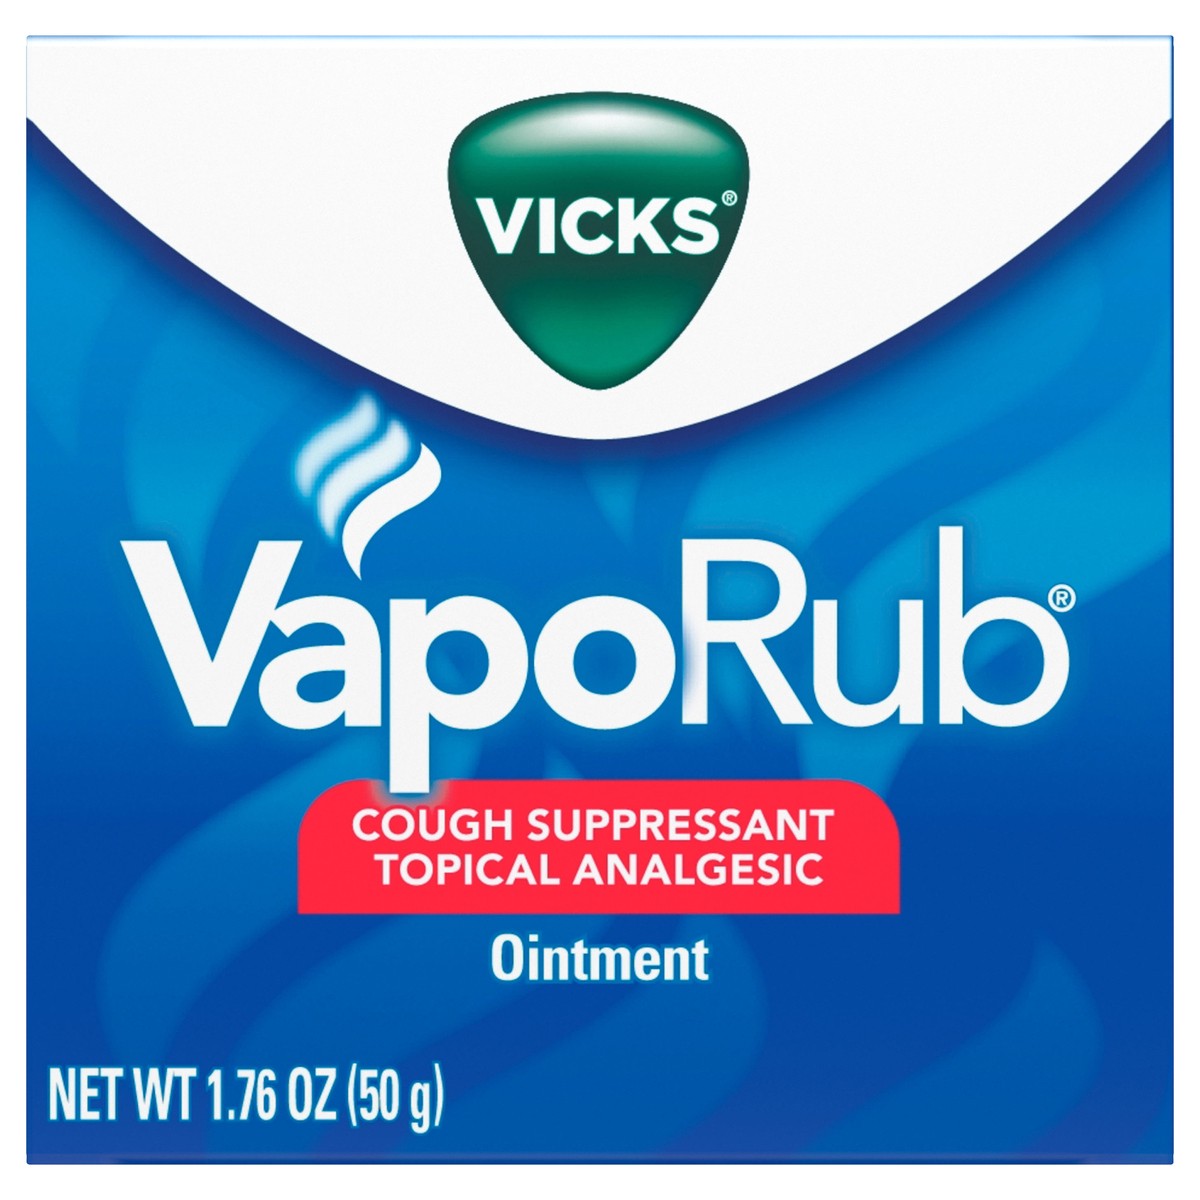 slide 1 of 2, Vicks VapoRub, Original, Cough Suppressant, Topical Chest Rub & Analgesic Ointment, Medicated Vicks Vapors, Relief from Cough Due to Cold, Aches & Pains, 1.76oz, 1.76 oz